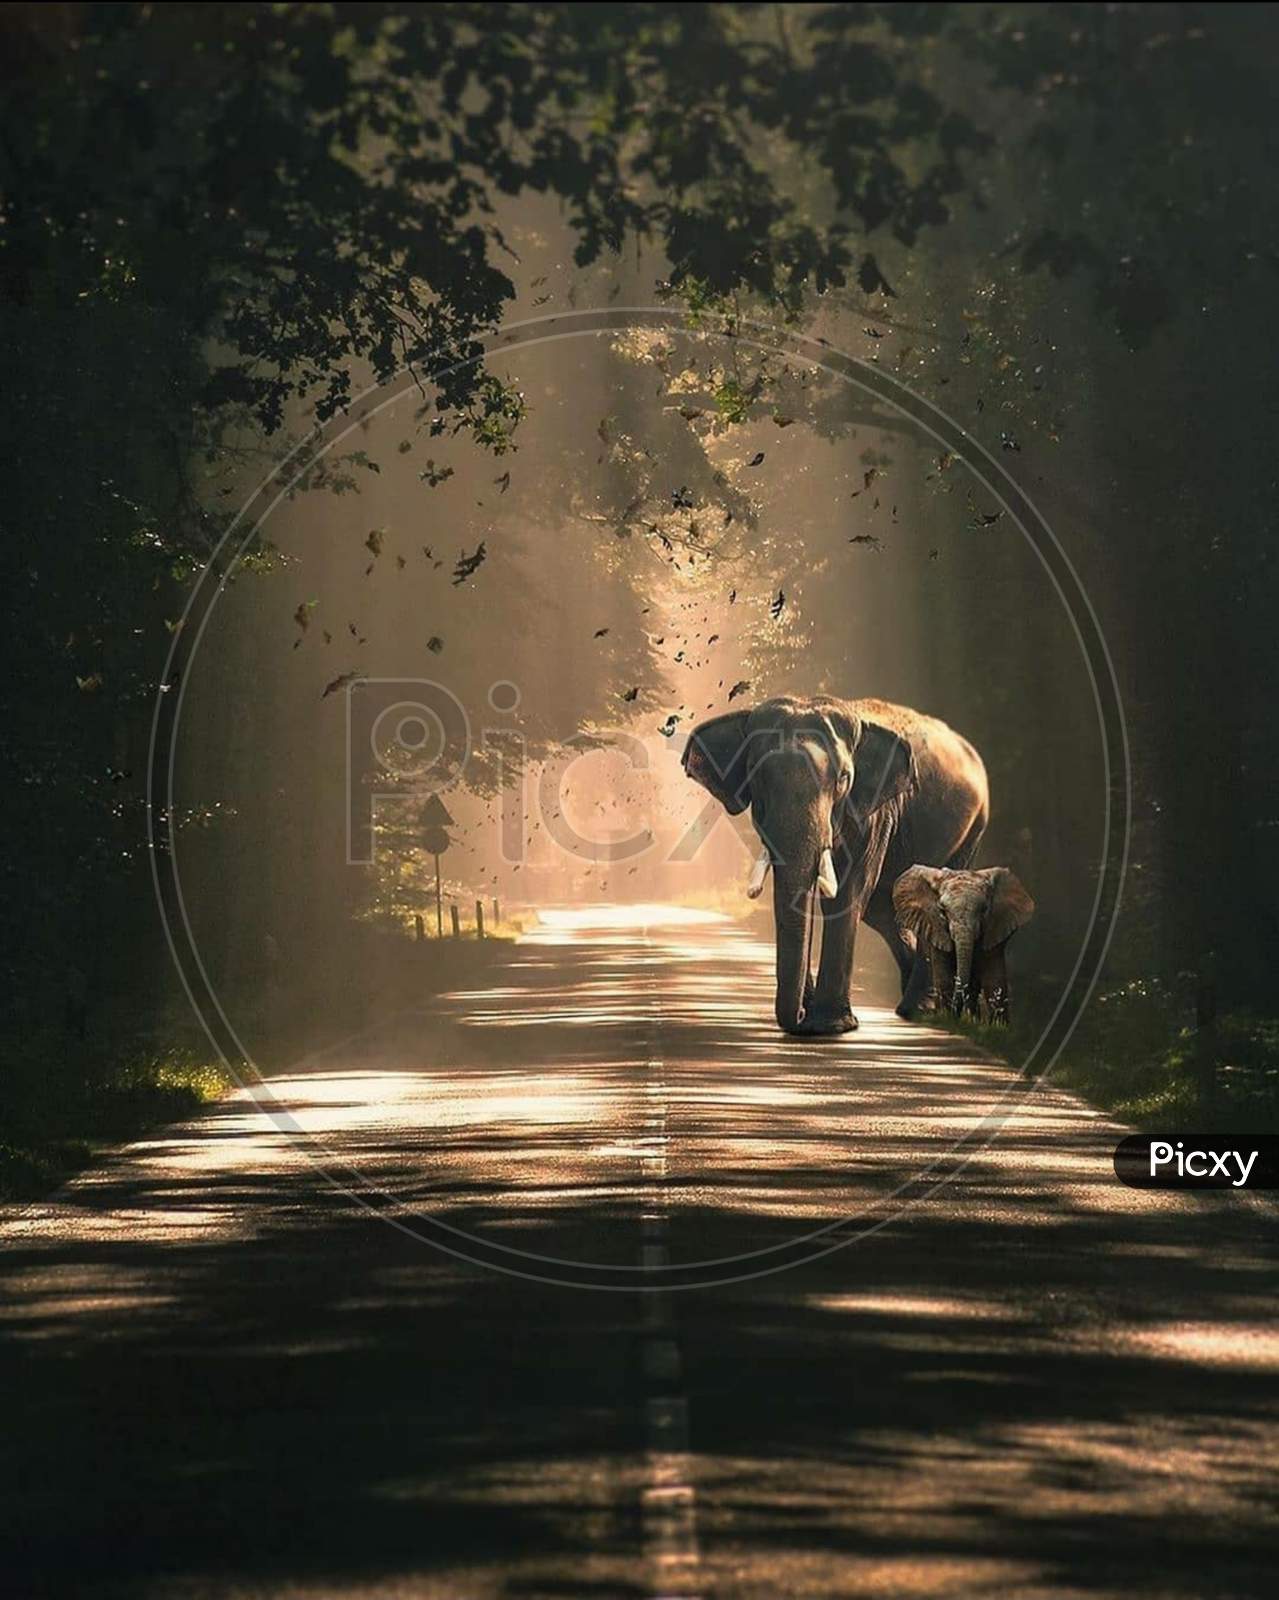 Image Of A Baby Elephant Is Walking With His Mother Or Father In The Middle Of The Road Cx Picxy